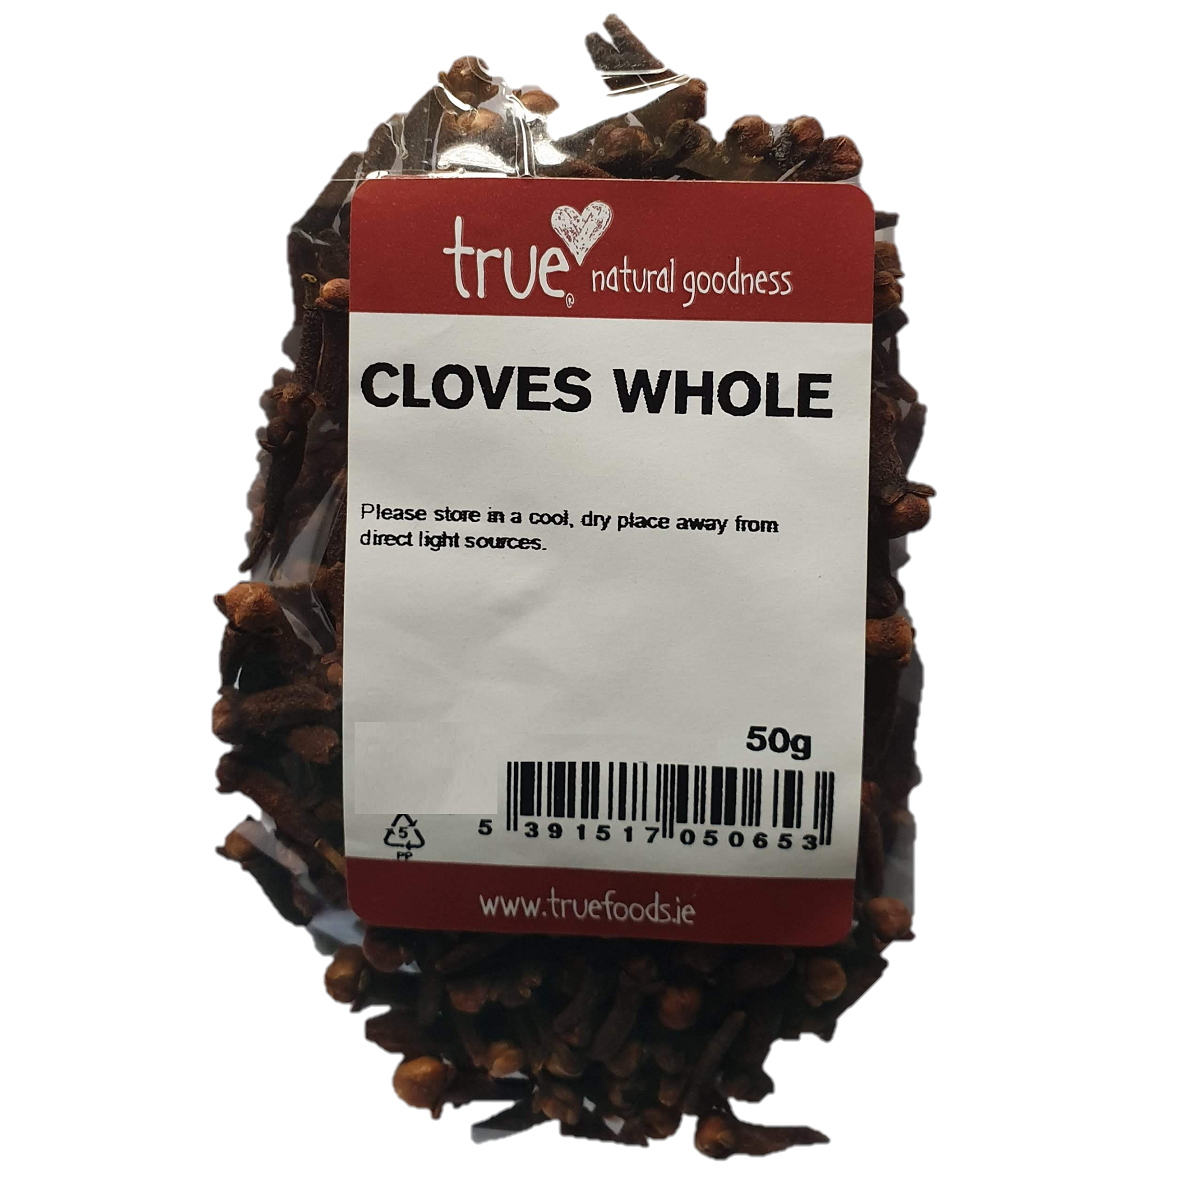 True Natural Goodness Cloves Whole 50g